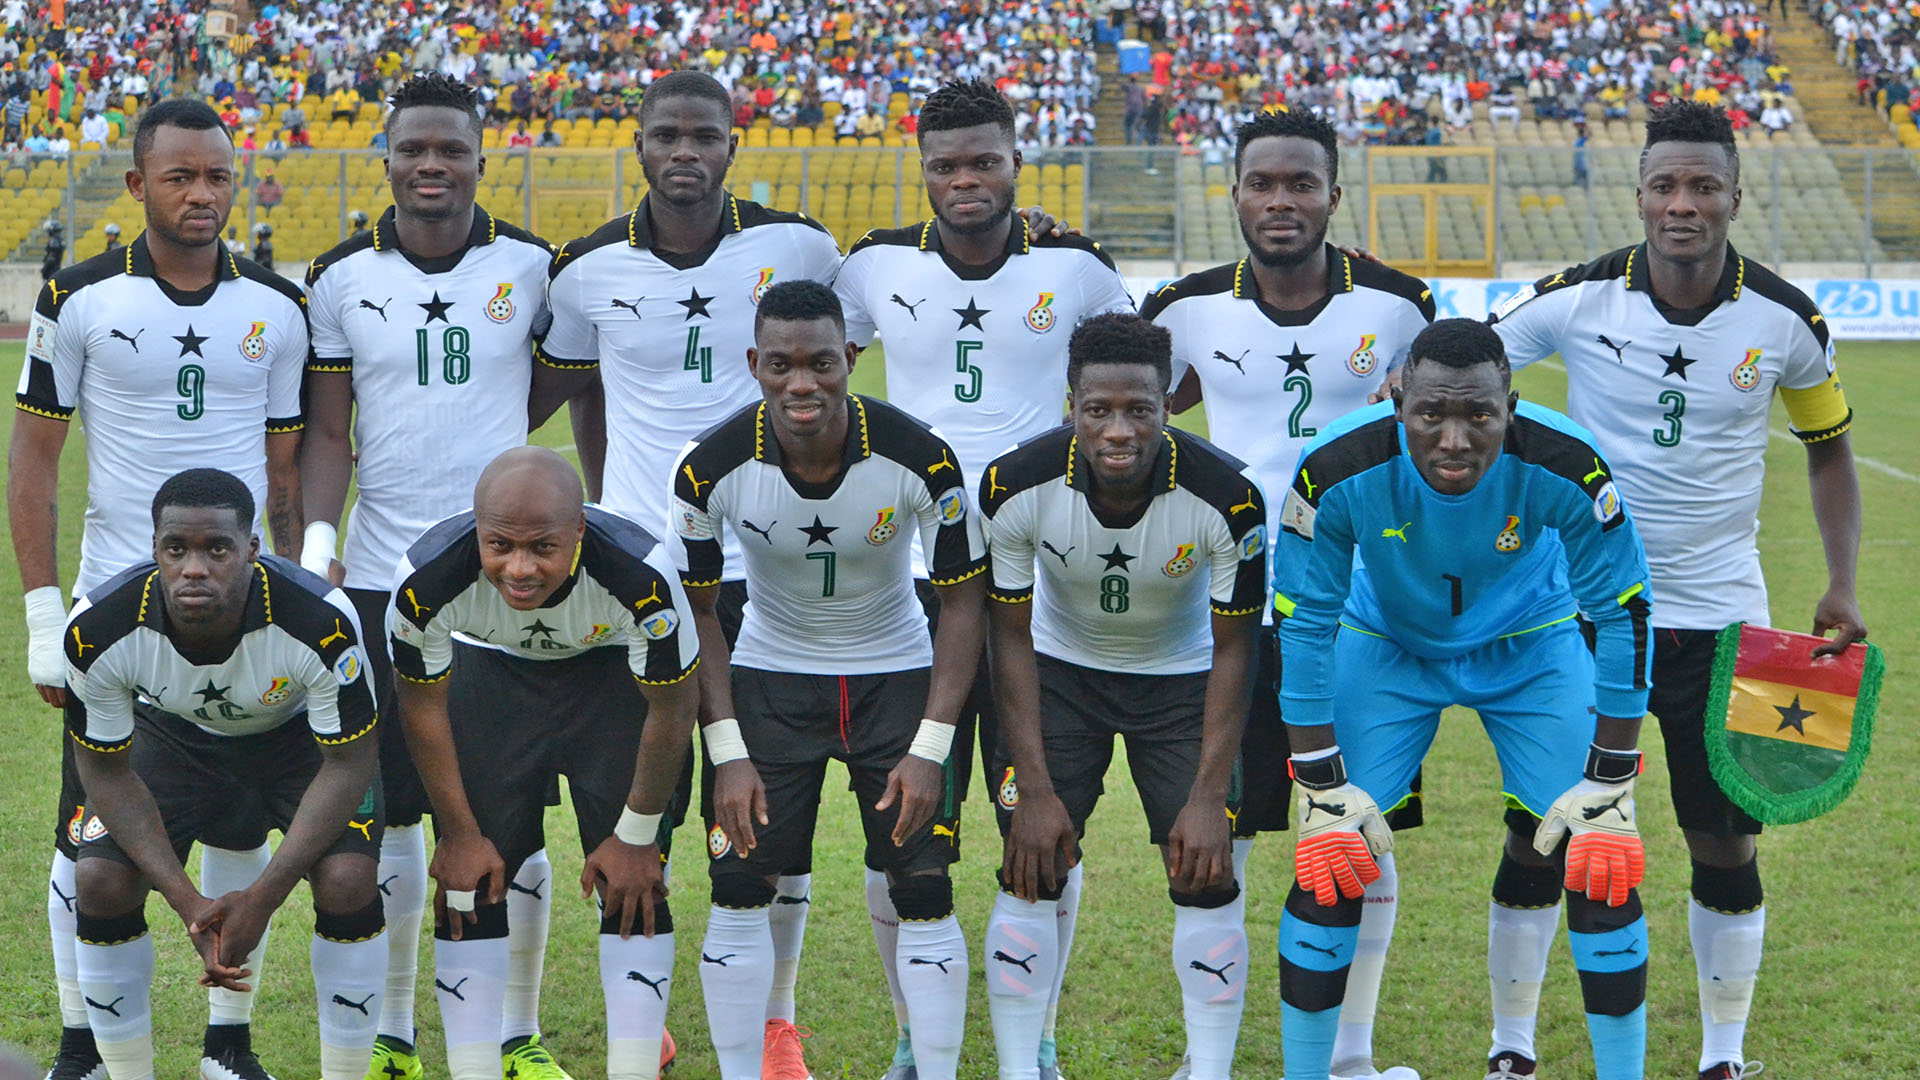 Afcon 2019: Ghana fixtures, results and table in Group F | Goal.com